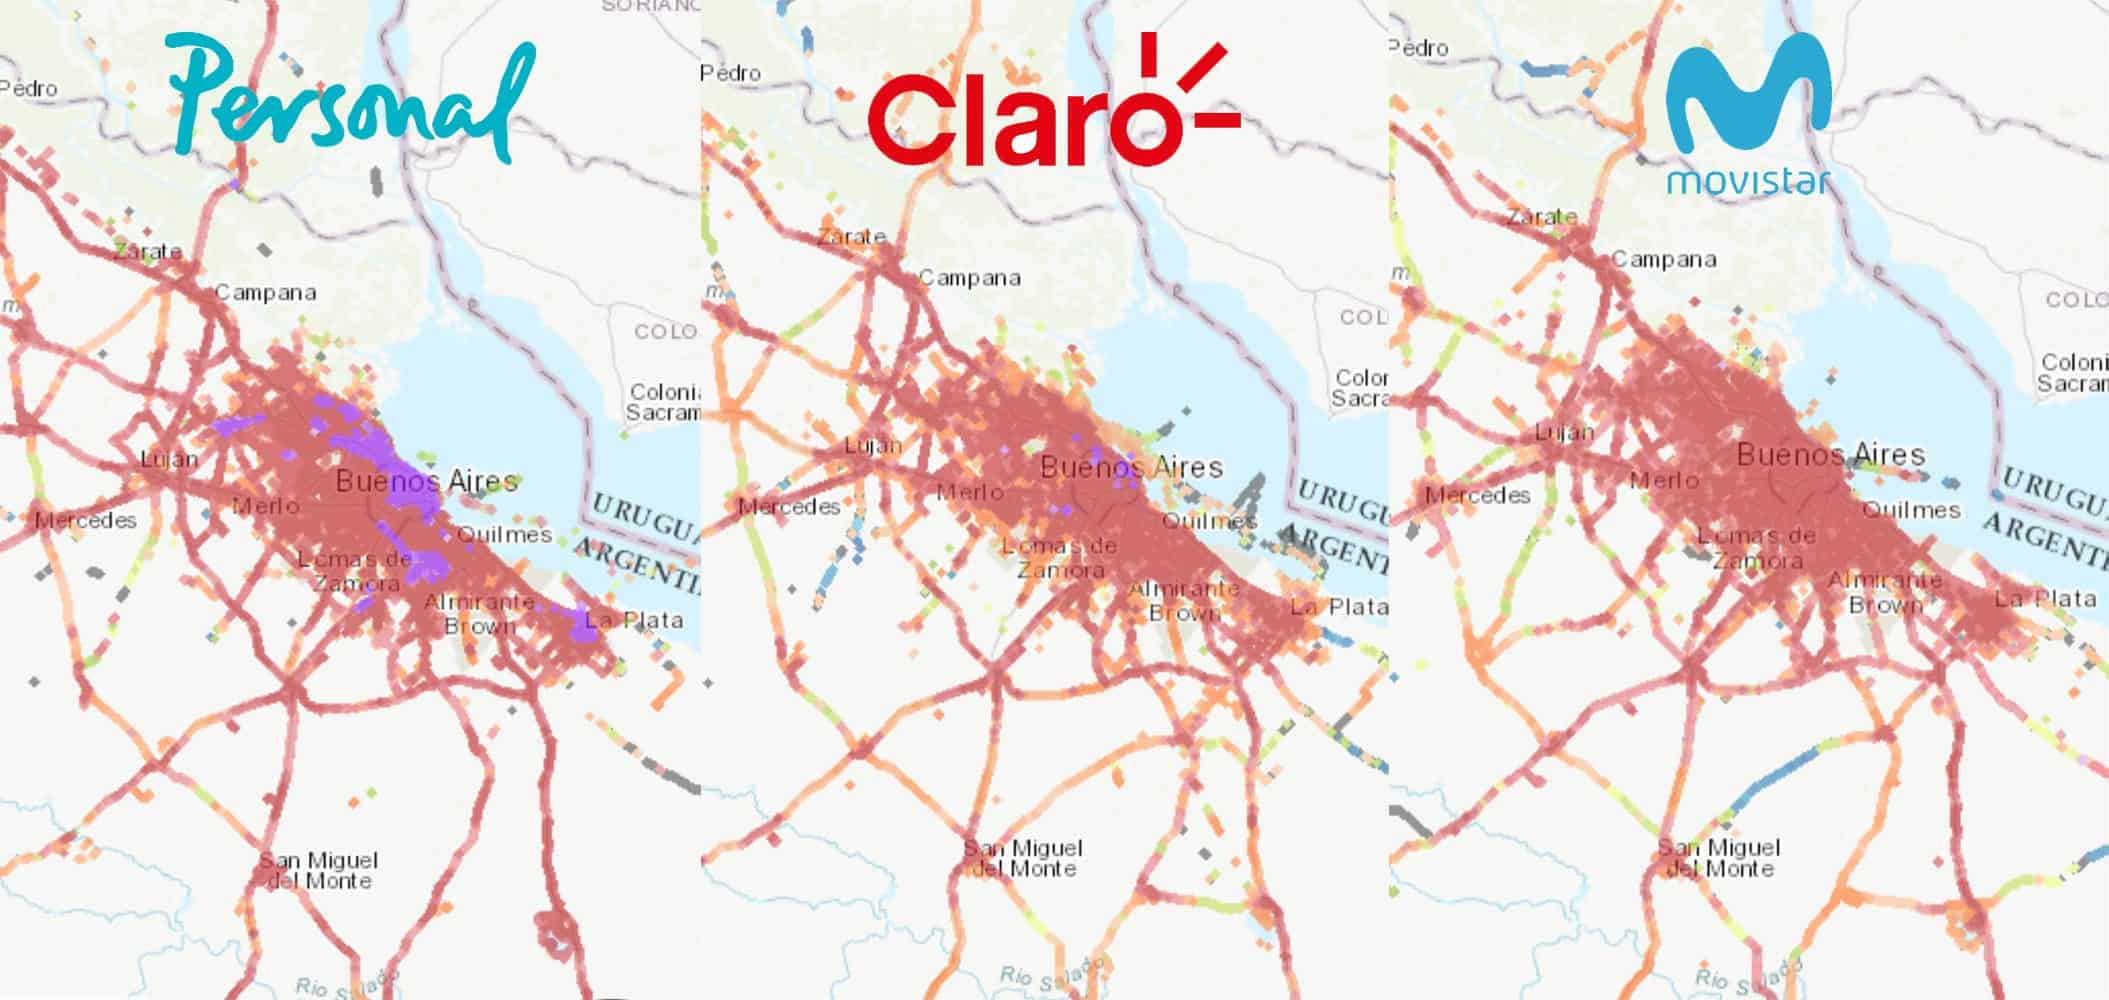 Mobile coverage in Buenos Aires